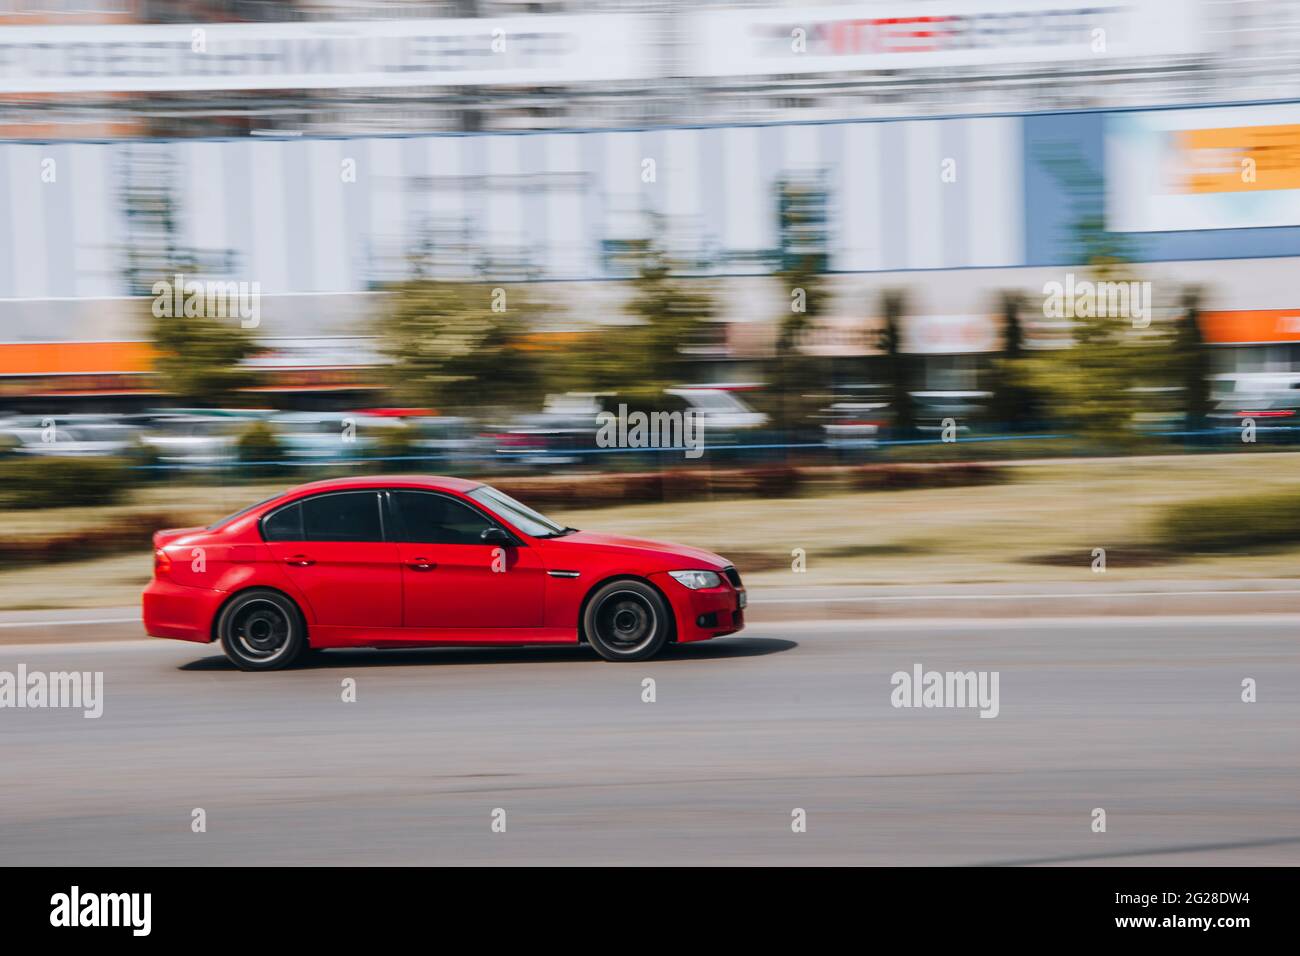 Ukraine, Kyiv - 13 May 2021: Red BMW 3 series car moving on the street. Editorial Stock Photo